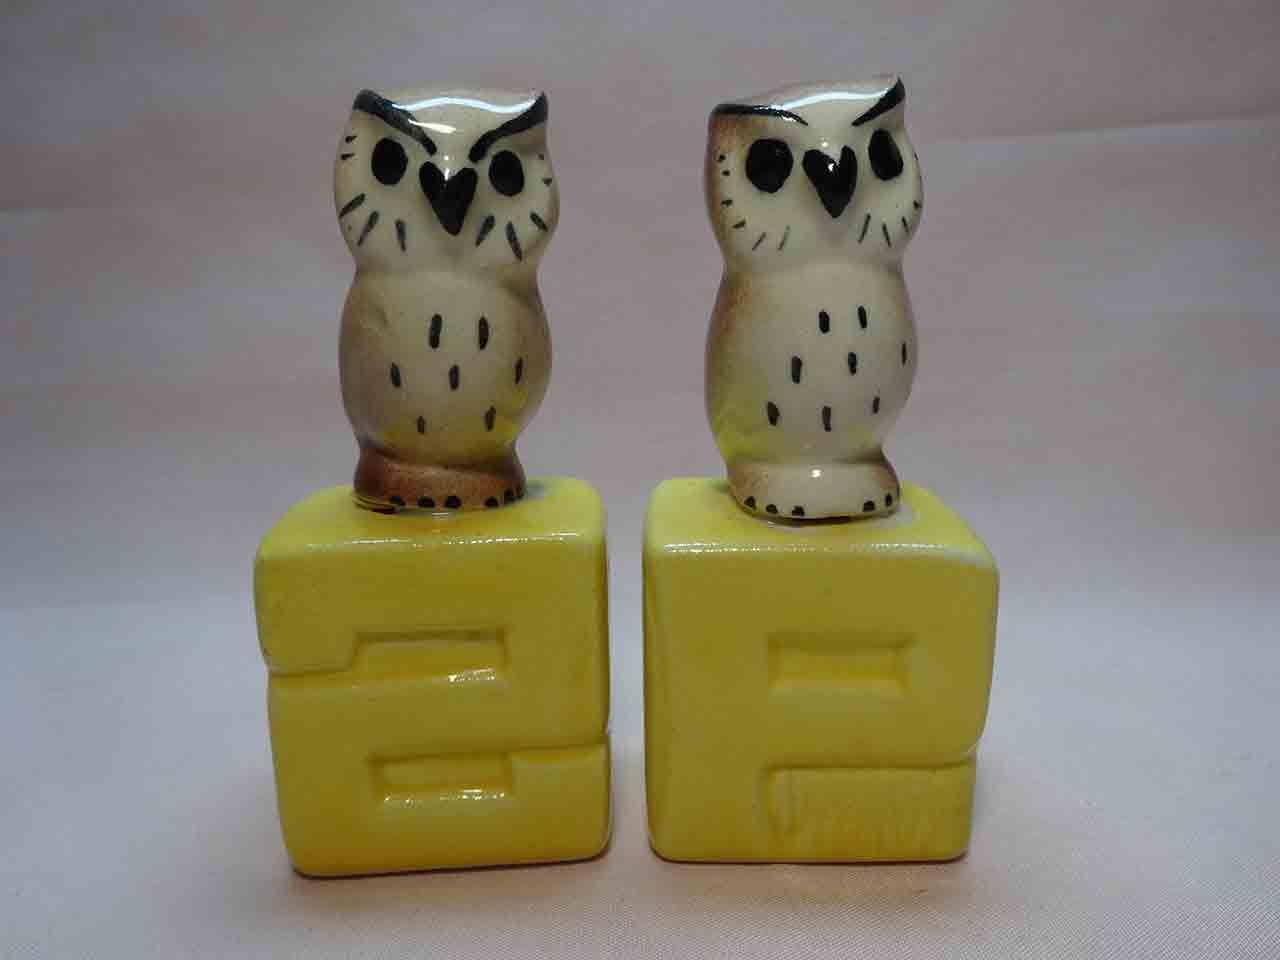 Animals on S&P letters salt and pepper shakers - Owls